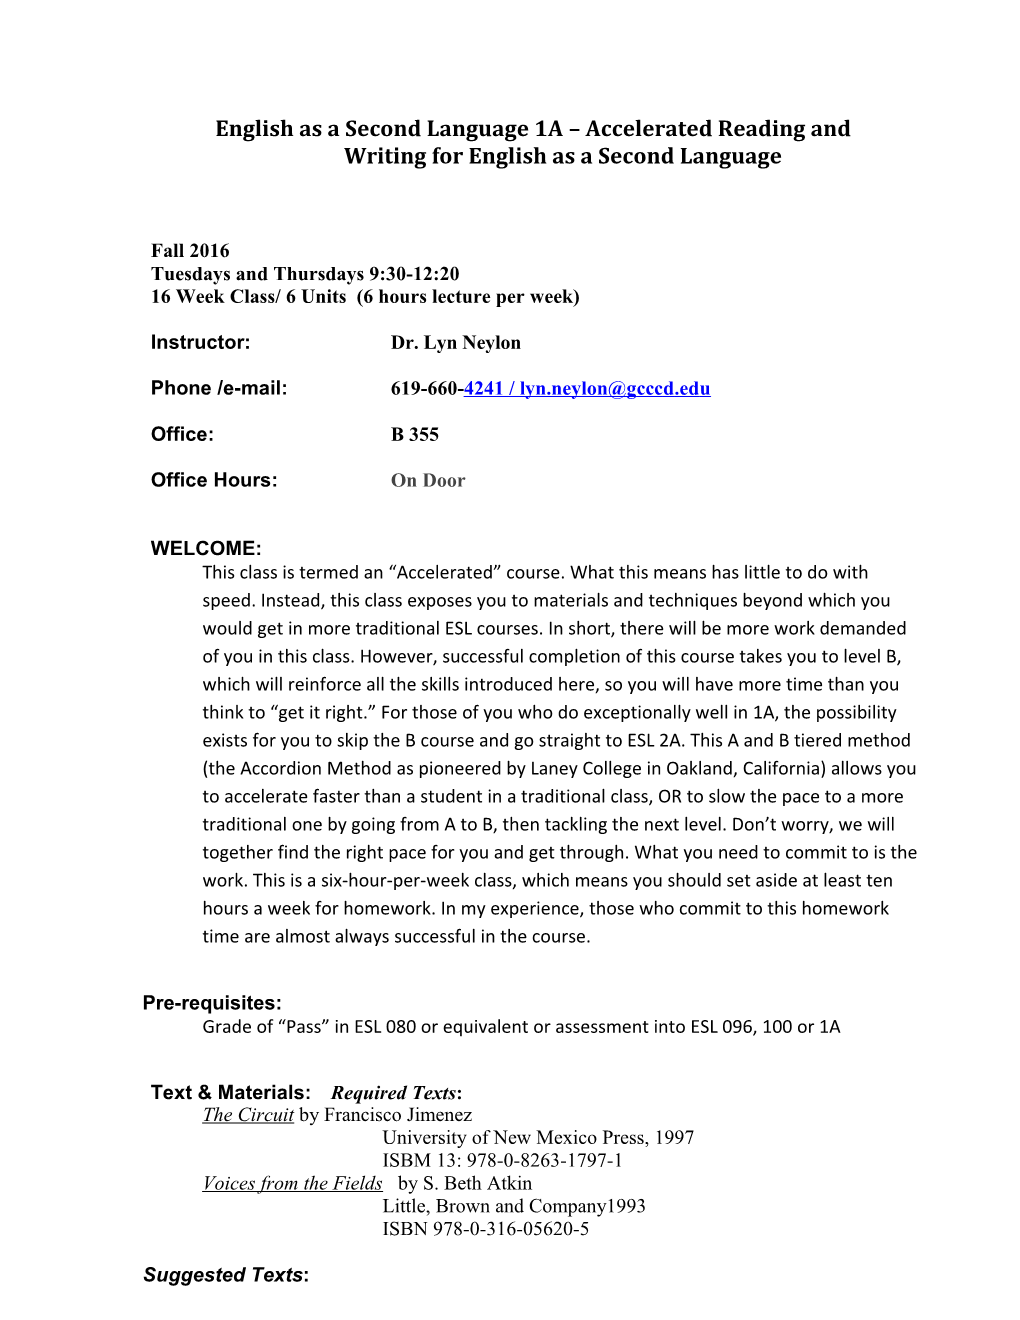 English As a Second Language 1A Accelerated Reading And